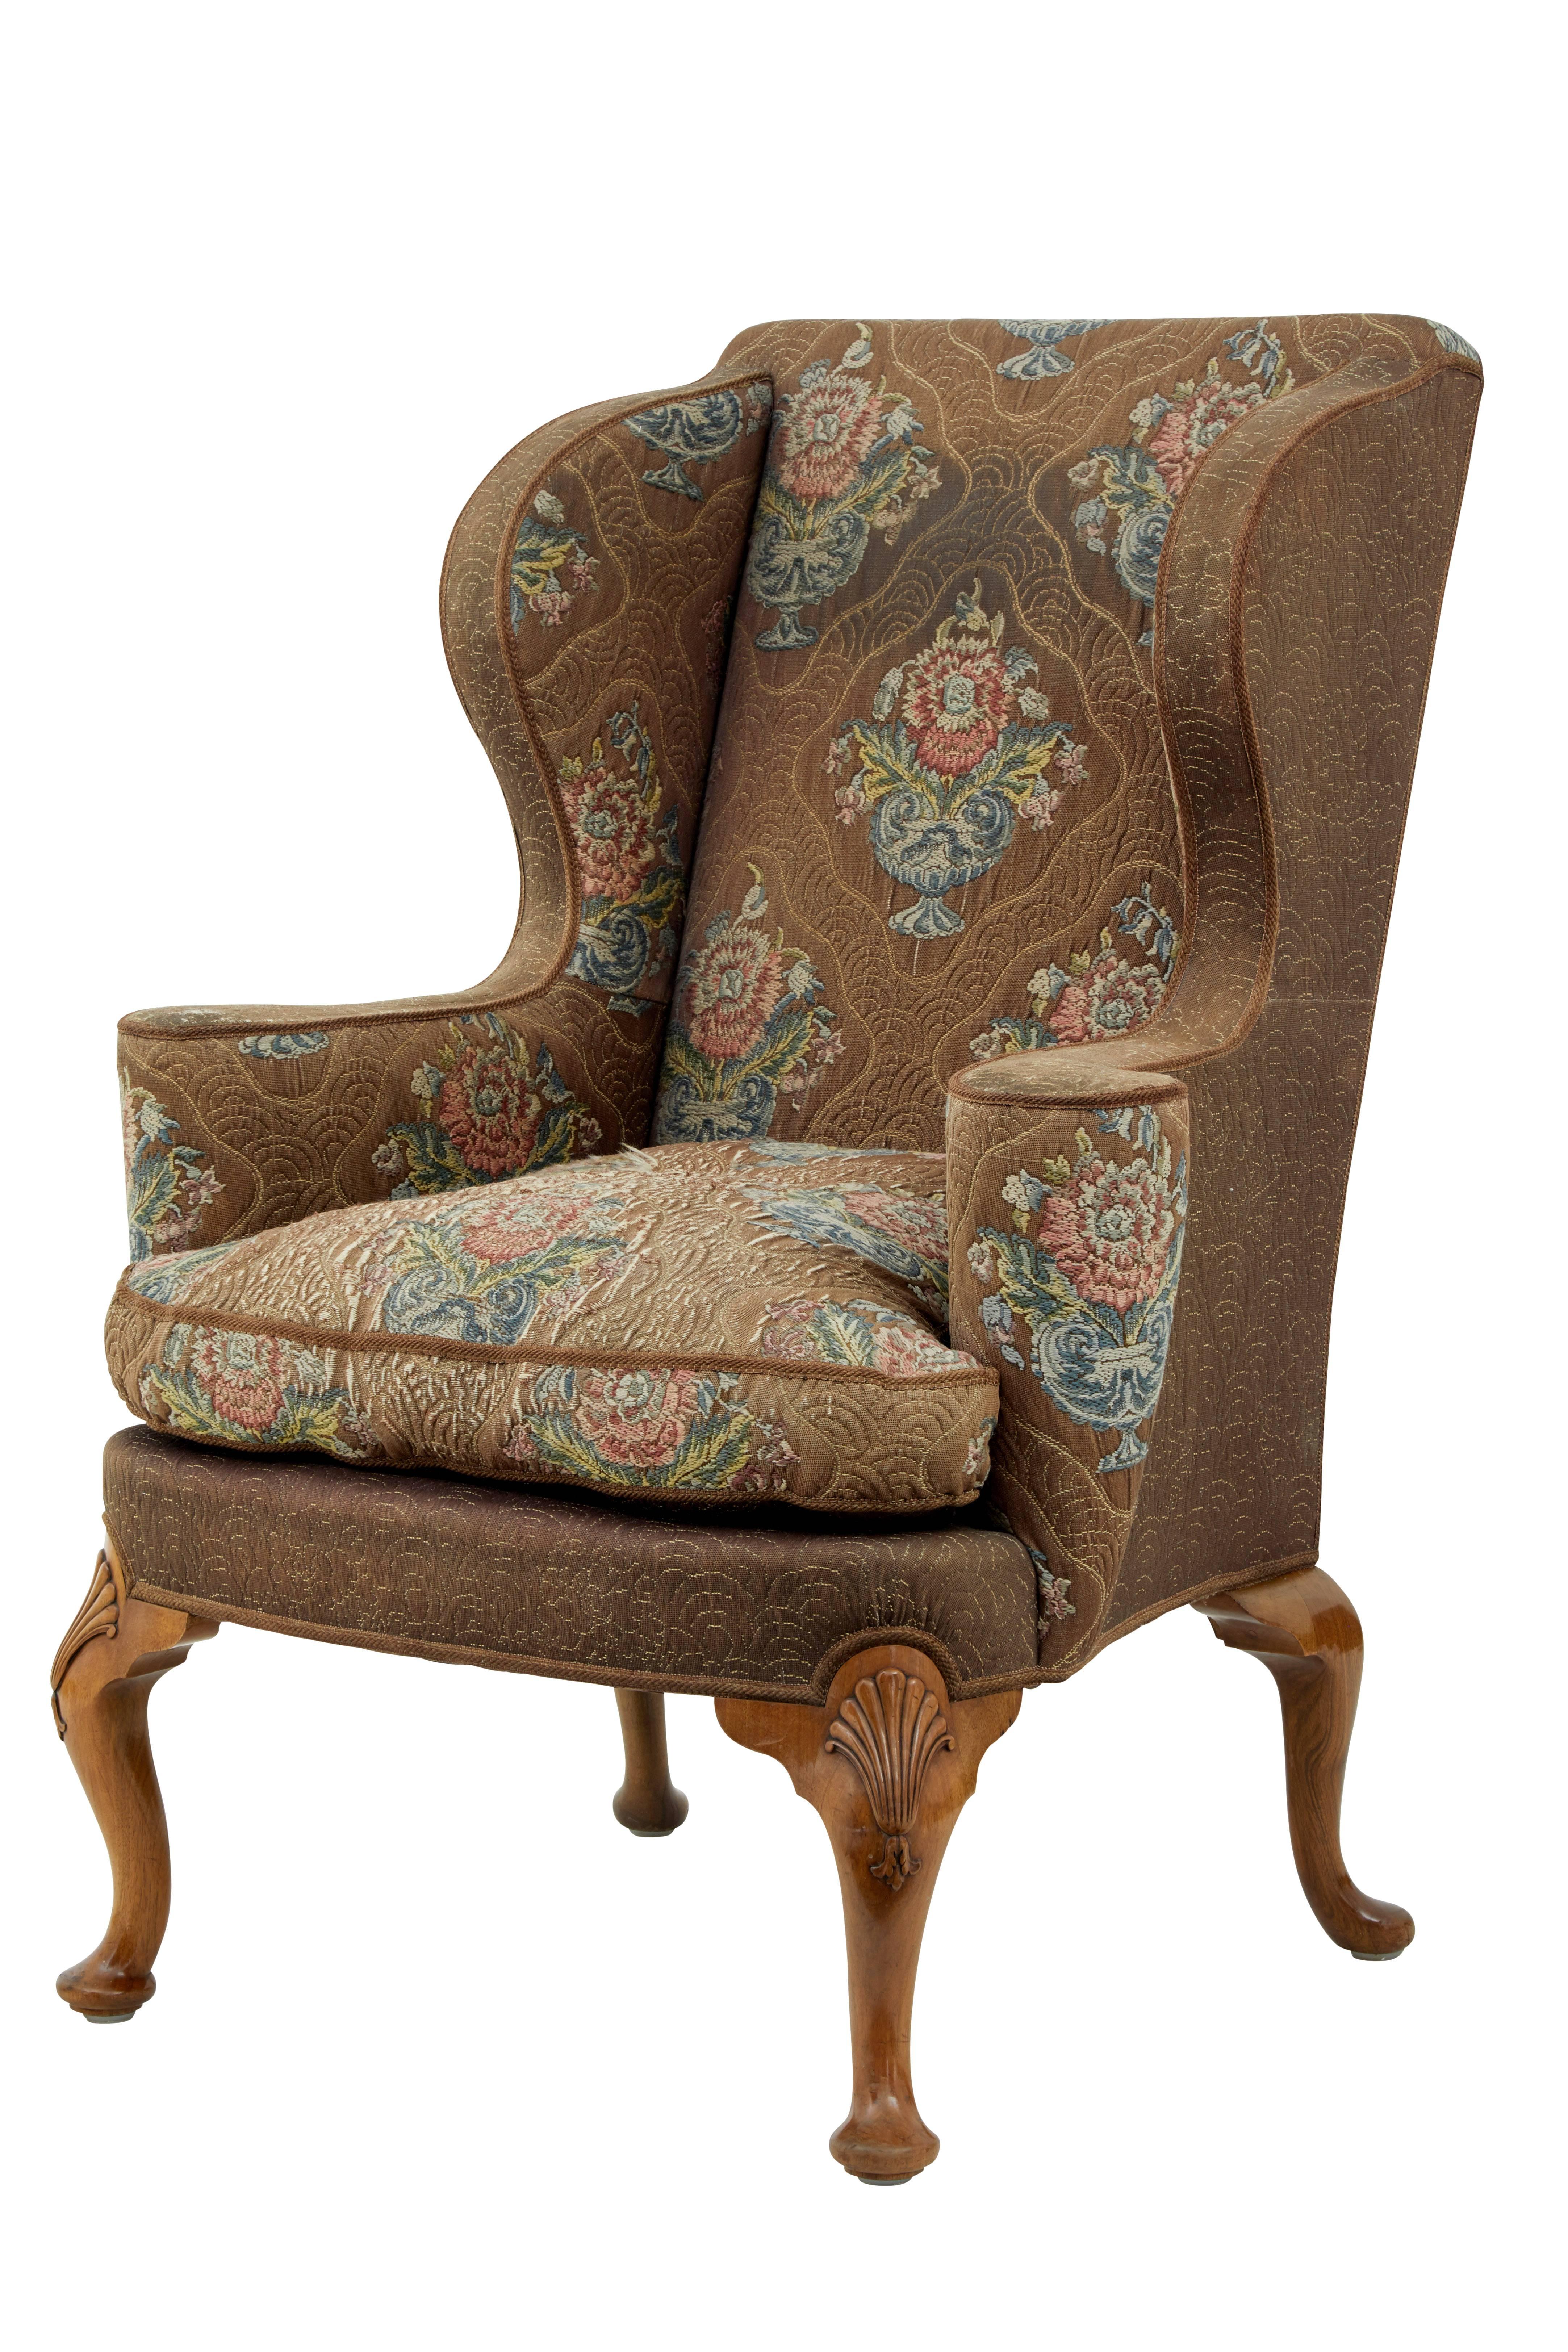 Stylish wing back armchair, circa 1900.
Very comfortable chair with original fabric.
Standing on four walnut cabriole legs with shells on the front knees.

Measures: Height: 44 1/2